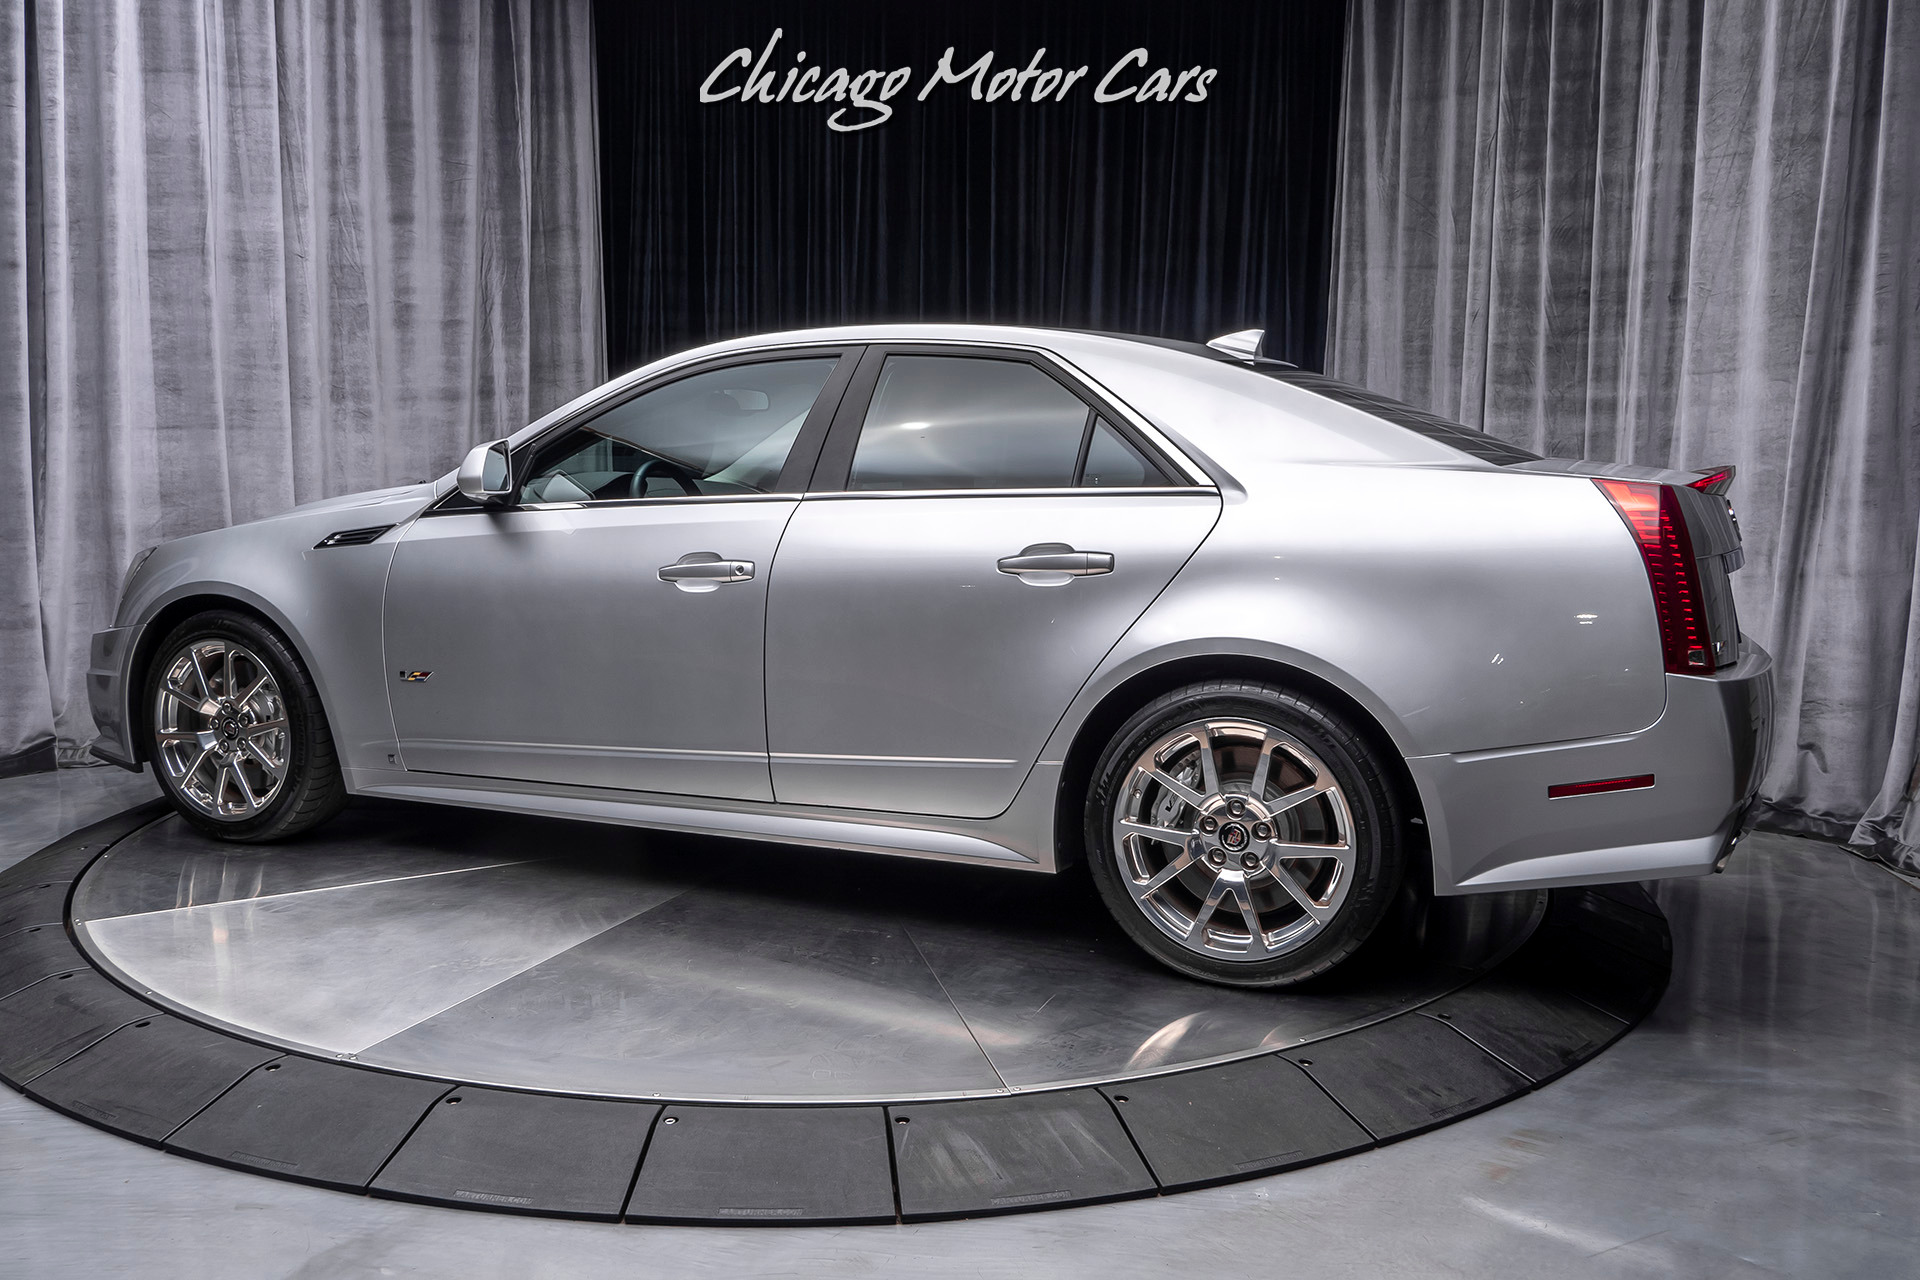 Used 2009 Cadillac Cts V Sedan Only 4k Miles For Sale